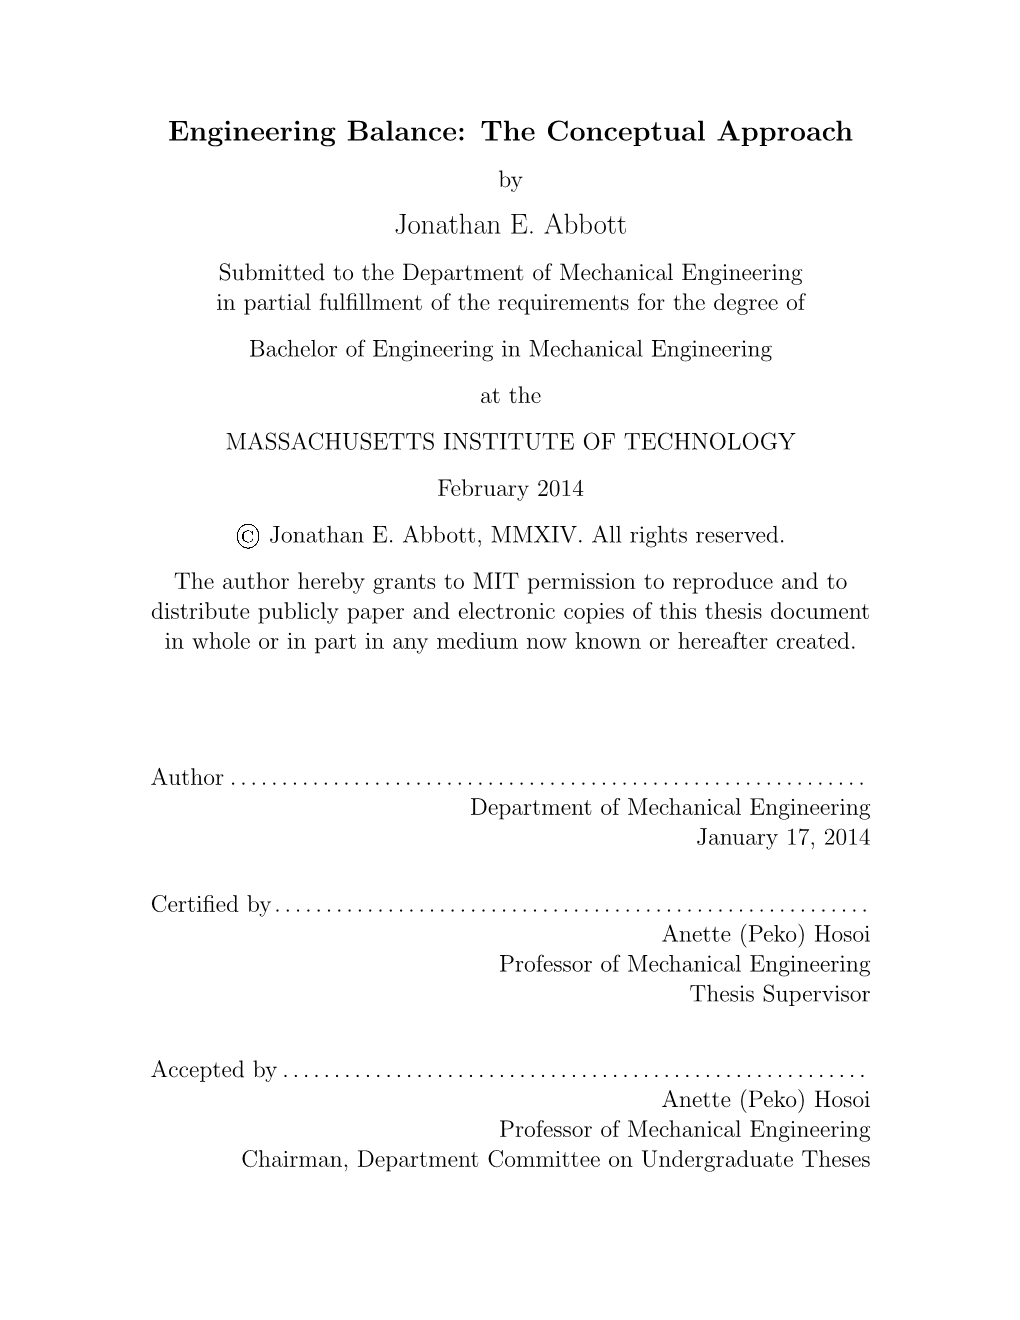 Engineering Balance: the Conceptual Approach by Jonathan E